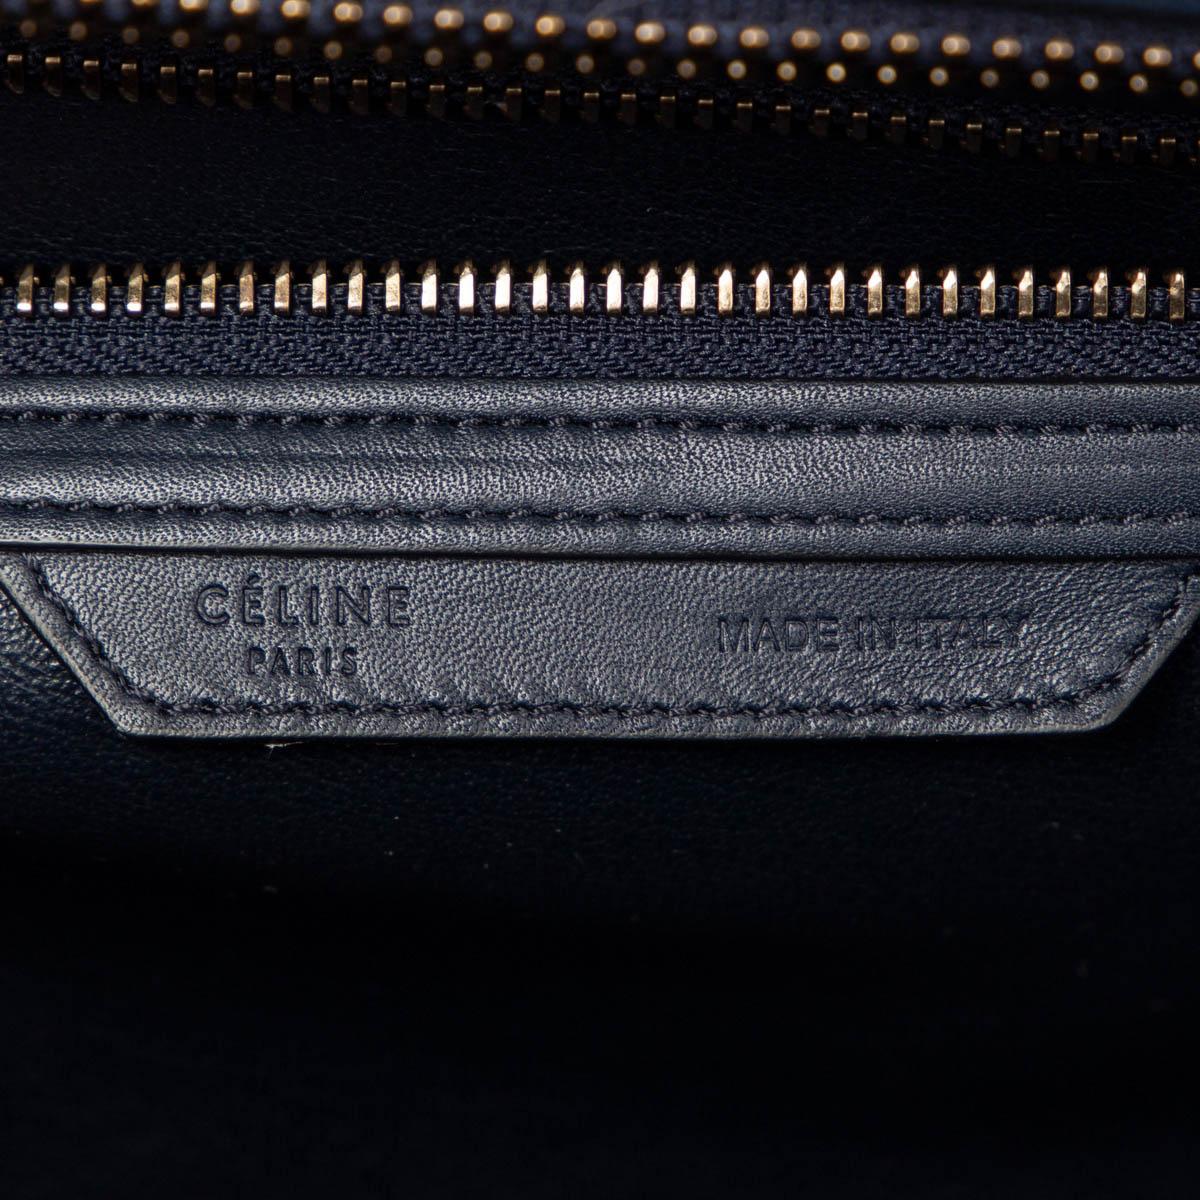 CELINE blue leather & STRIPE CANVAS 2016 MINI LUGGAGE TOTE Bag In Excellent Condition For Sale In Zürich, CH